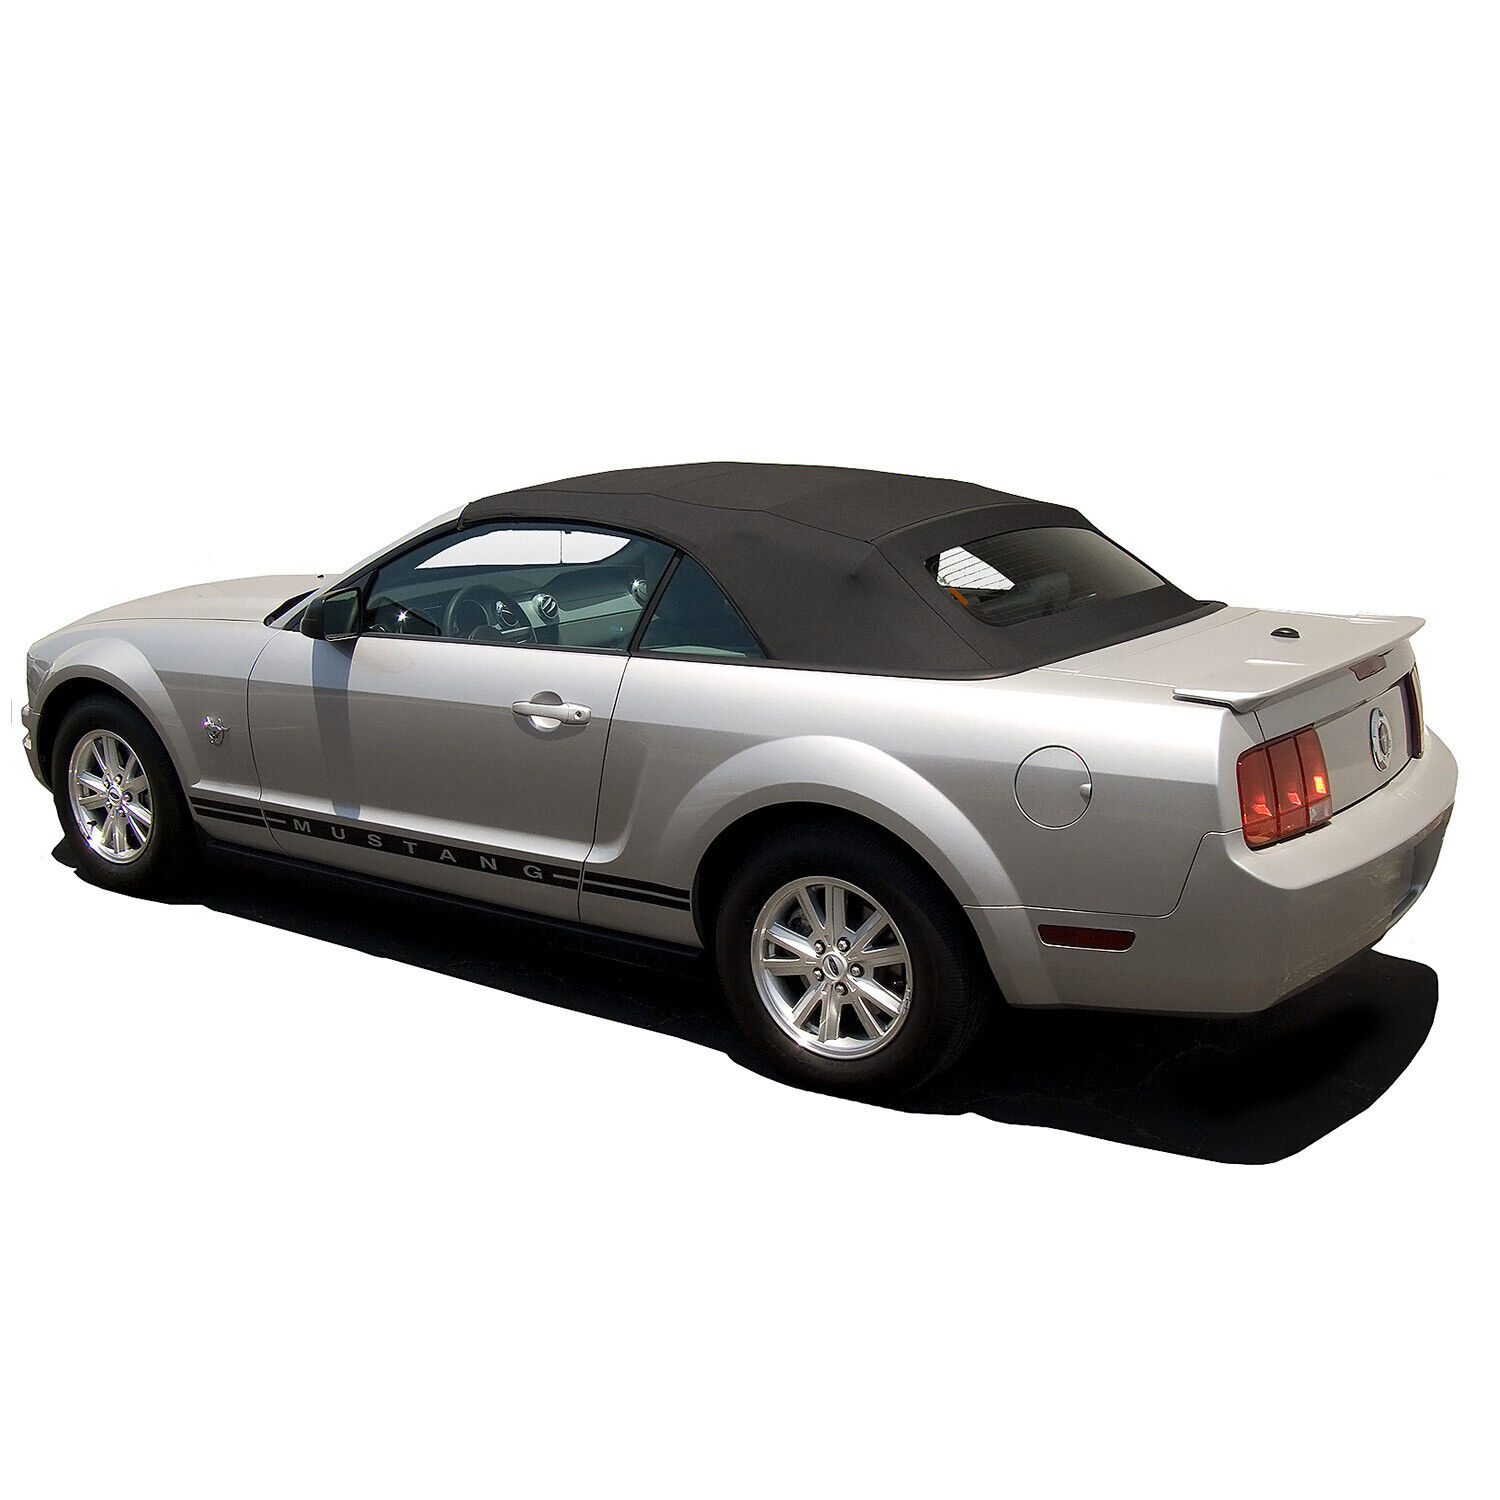 2005-14 Ford Mustang Convertible Soft Top w/ Glass Window - Black Sailcloth